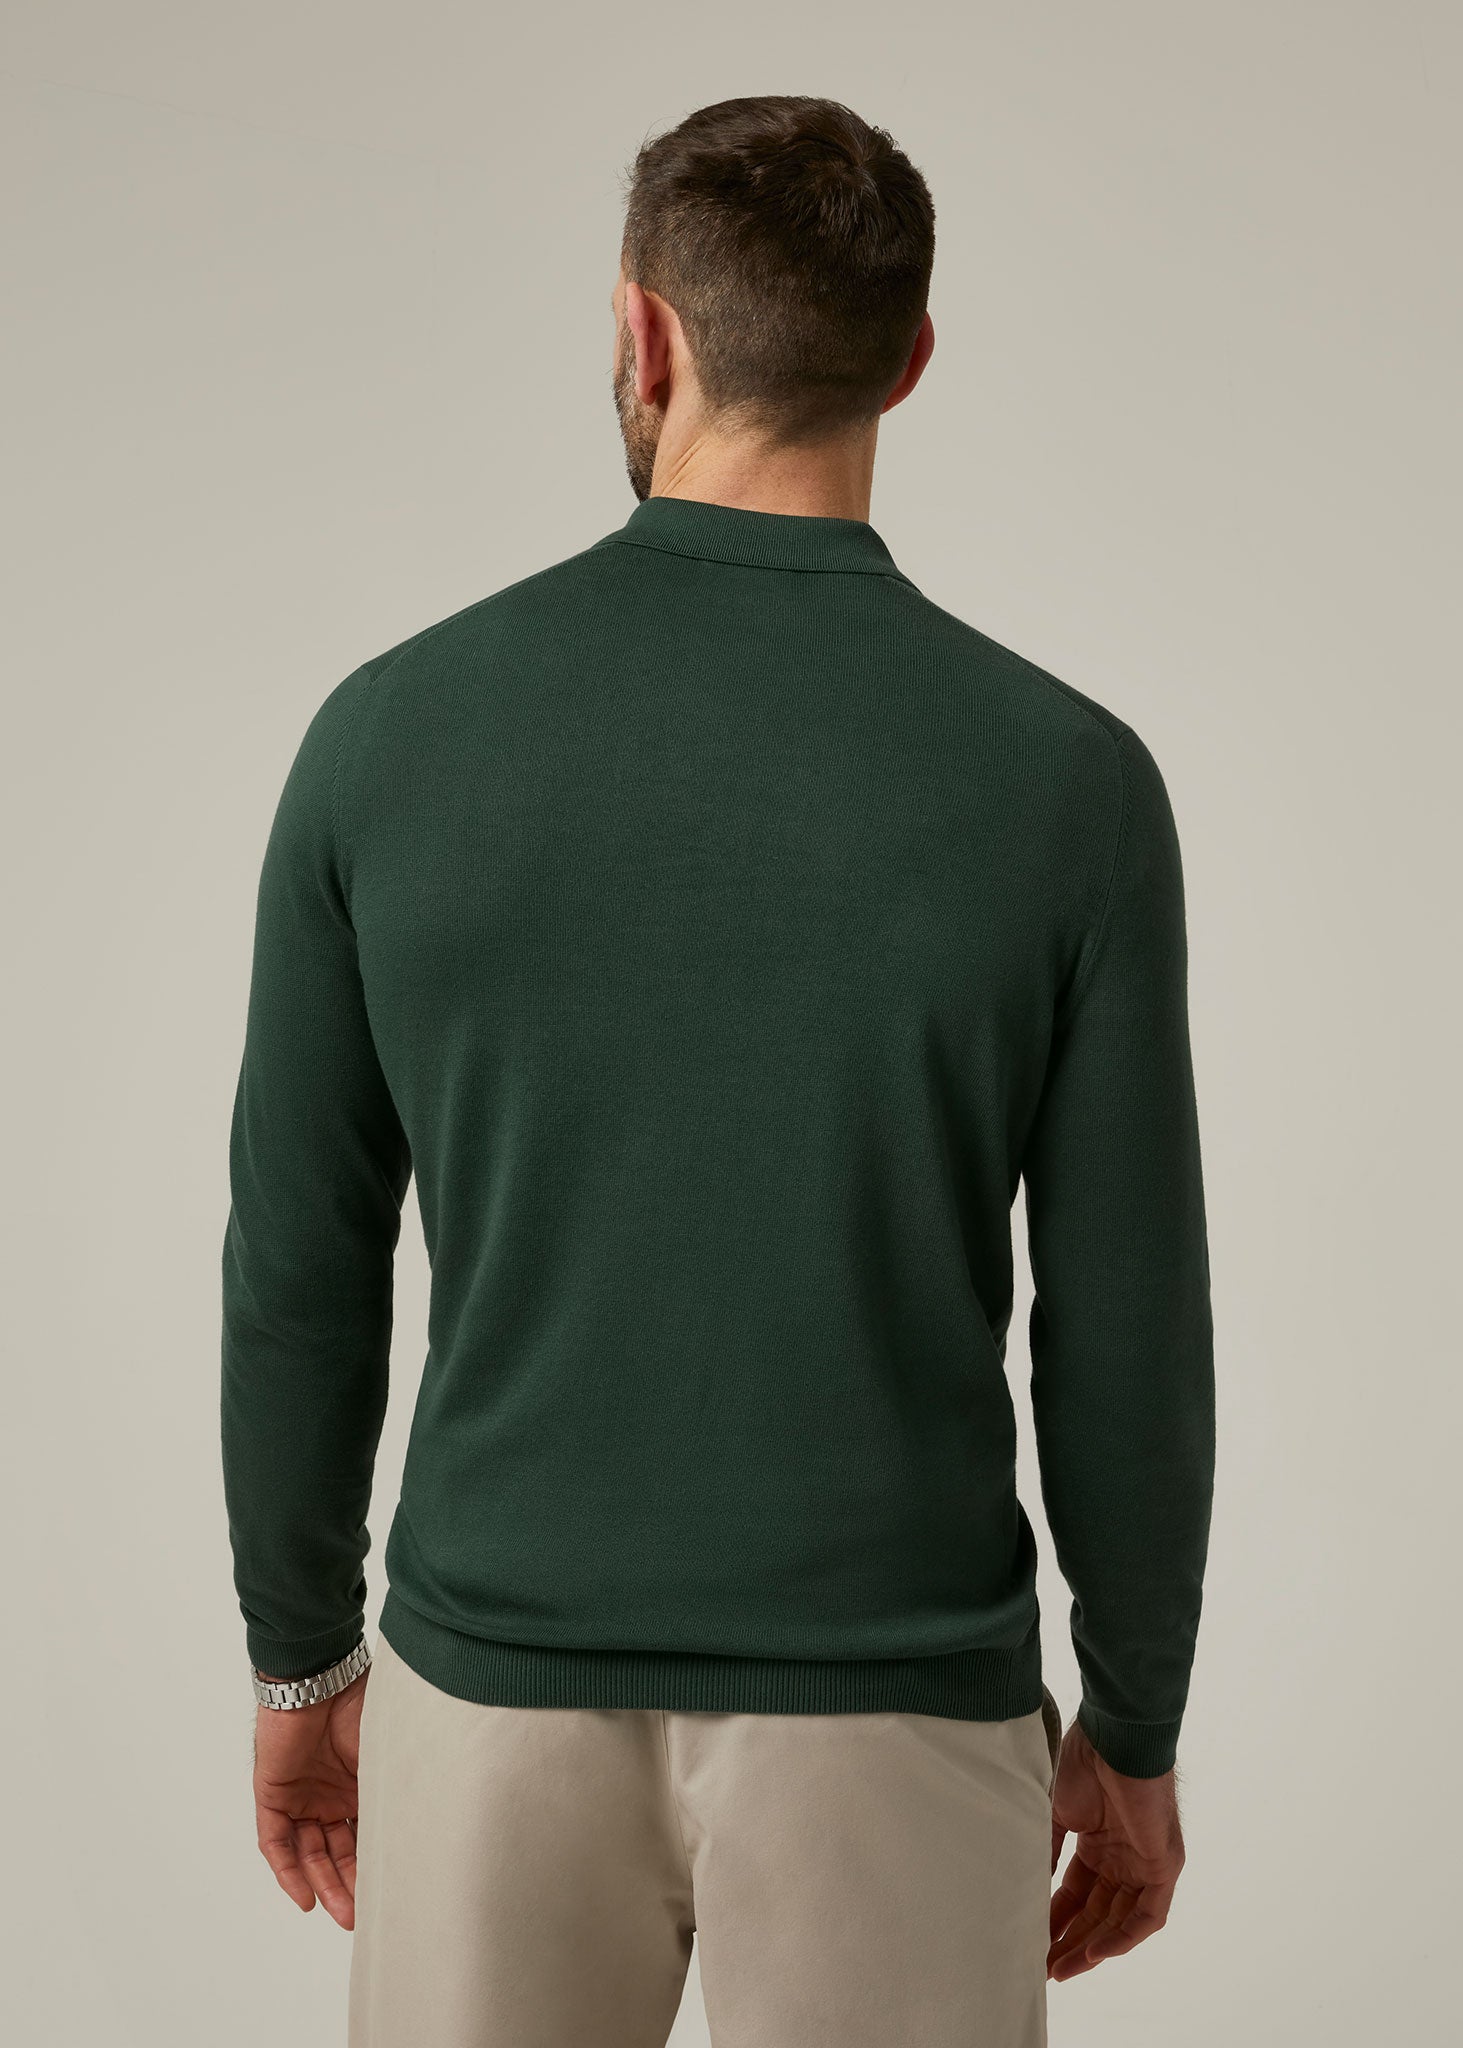 Emsworth Cotton Long Sleeve Polo Shirt in Racing Green